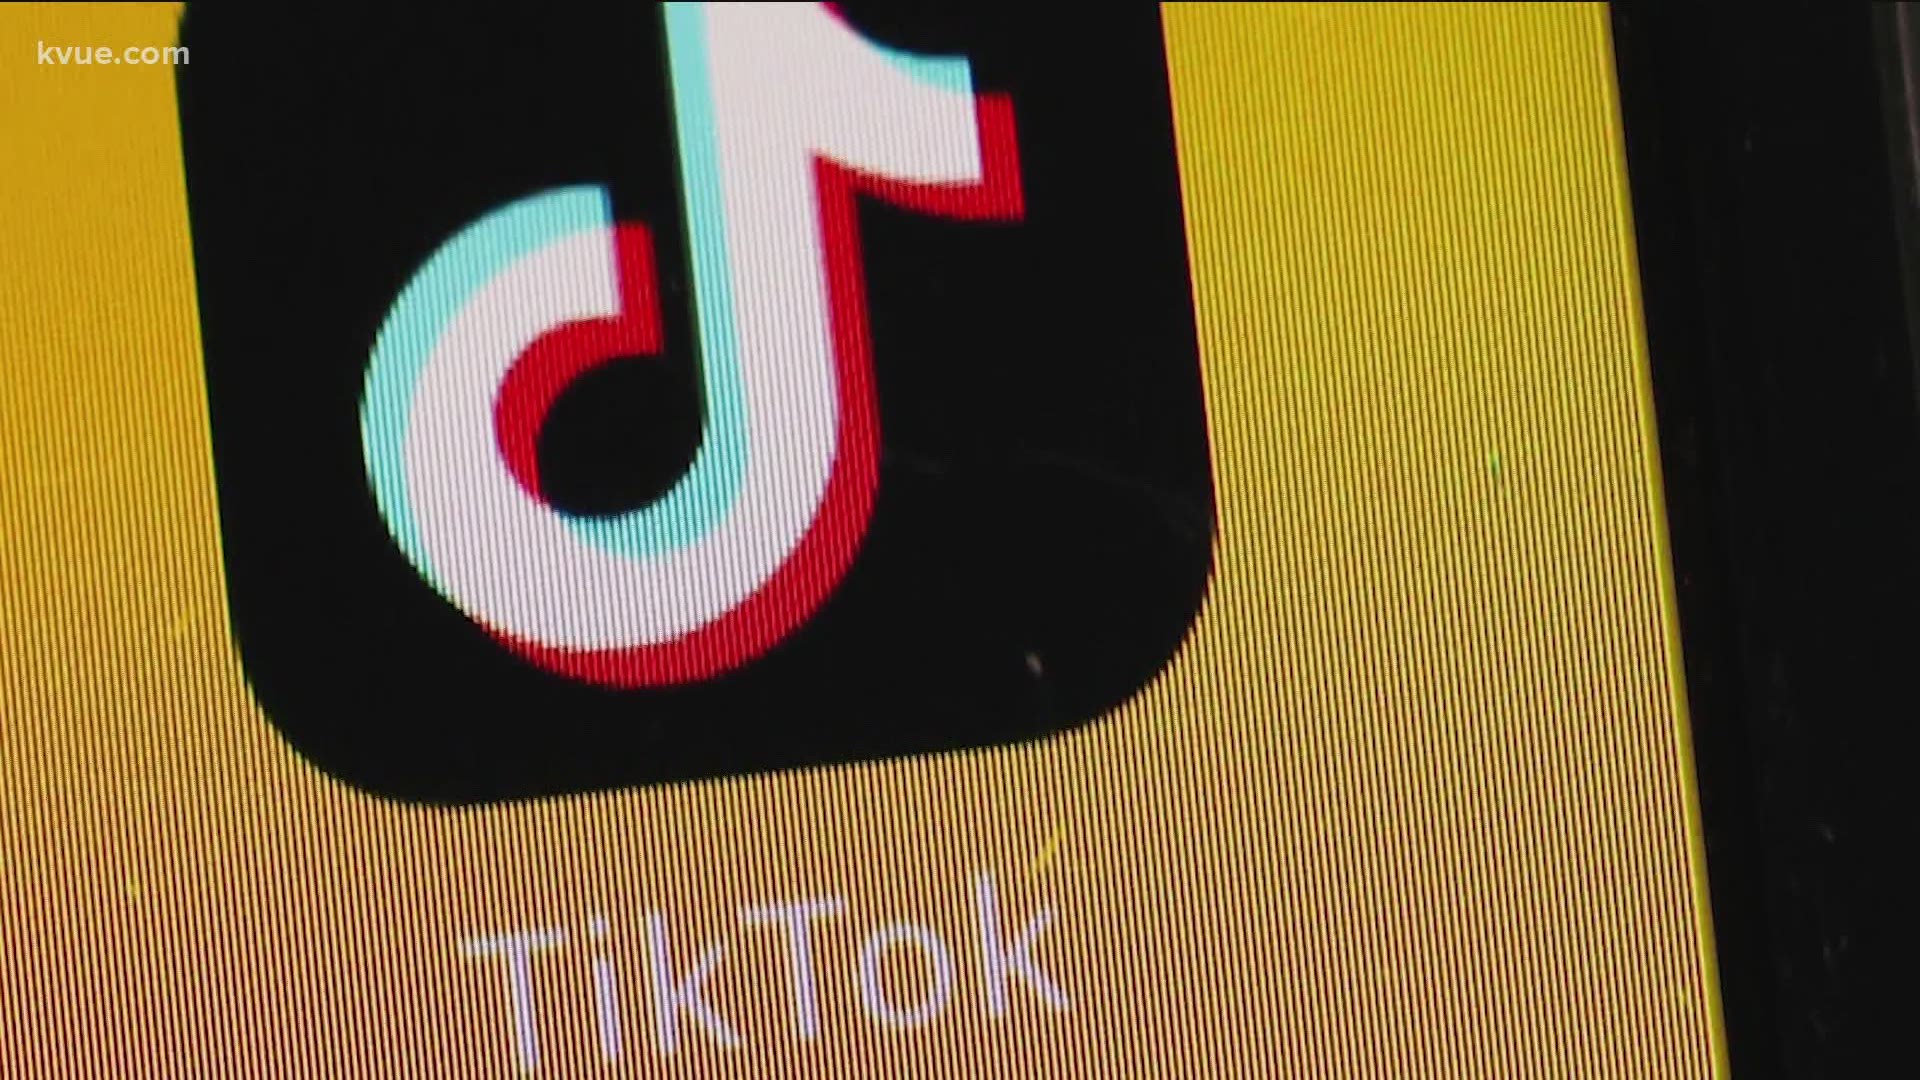 TikTok said it's planning to bring hundreds of jobs to the Austin area.